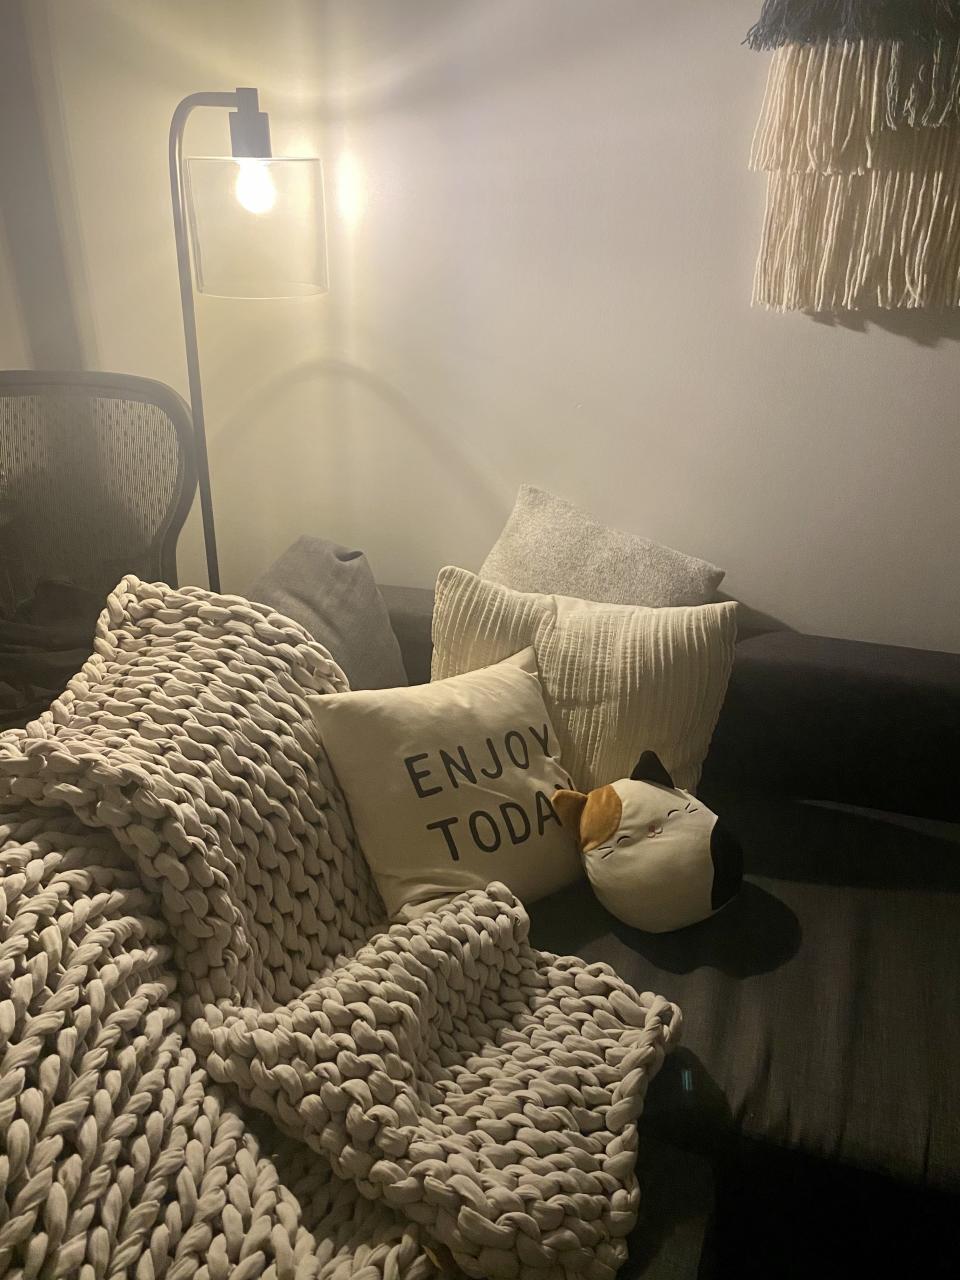 Essentials for a cozy corner: reading lamp, plenty of pillows, and a weighted blanket.